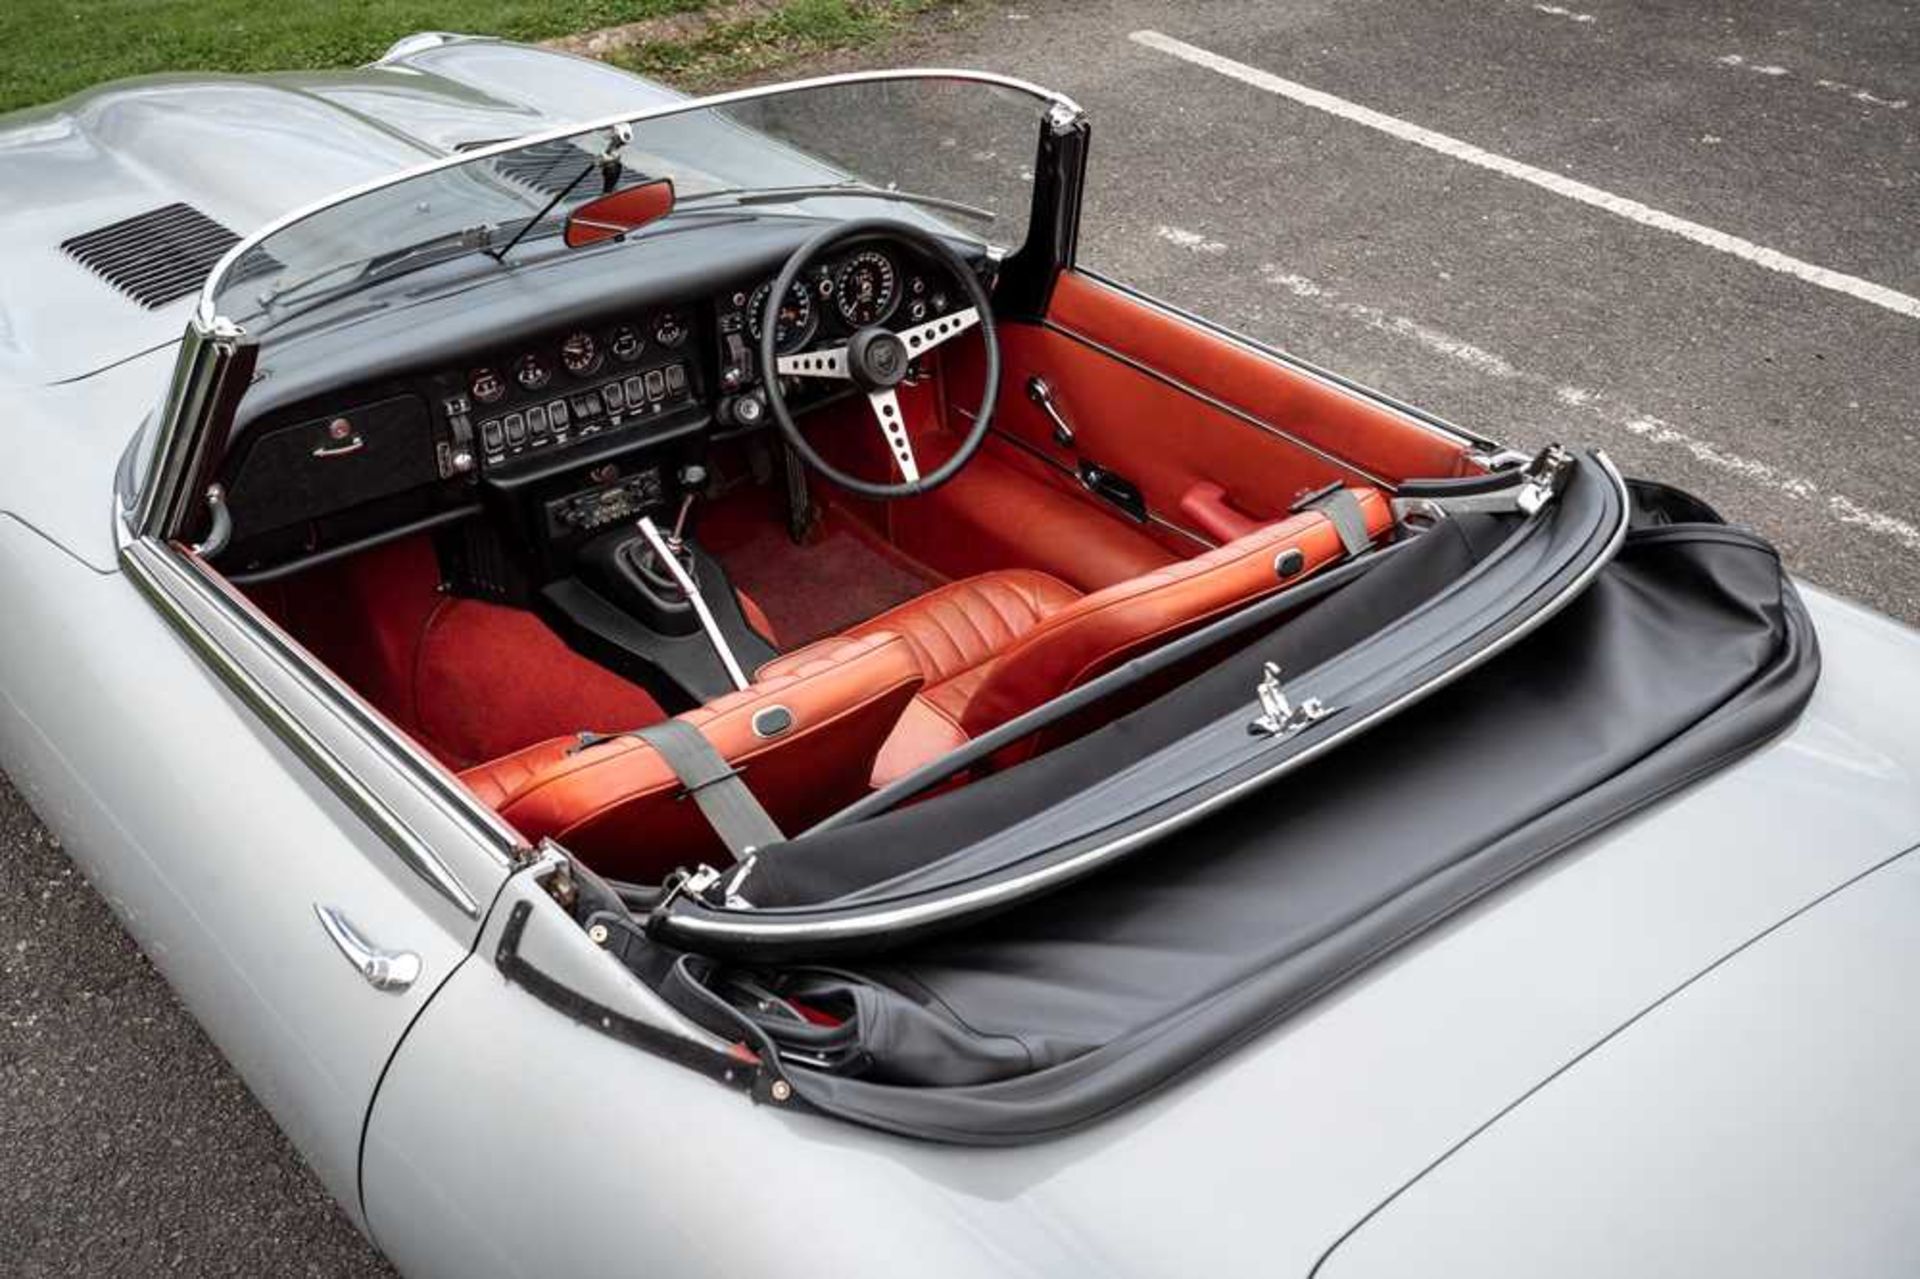 1974 Jaguar E-Type Series III V12 Roadster Only one family owner and 54,412 miles from new - Image 23 of 89